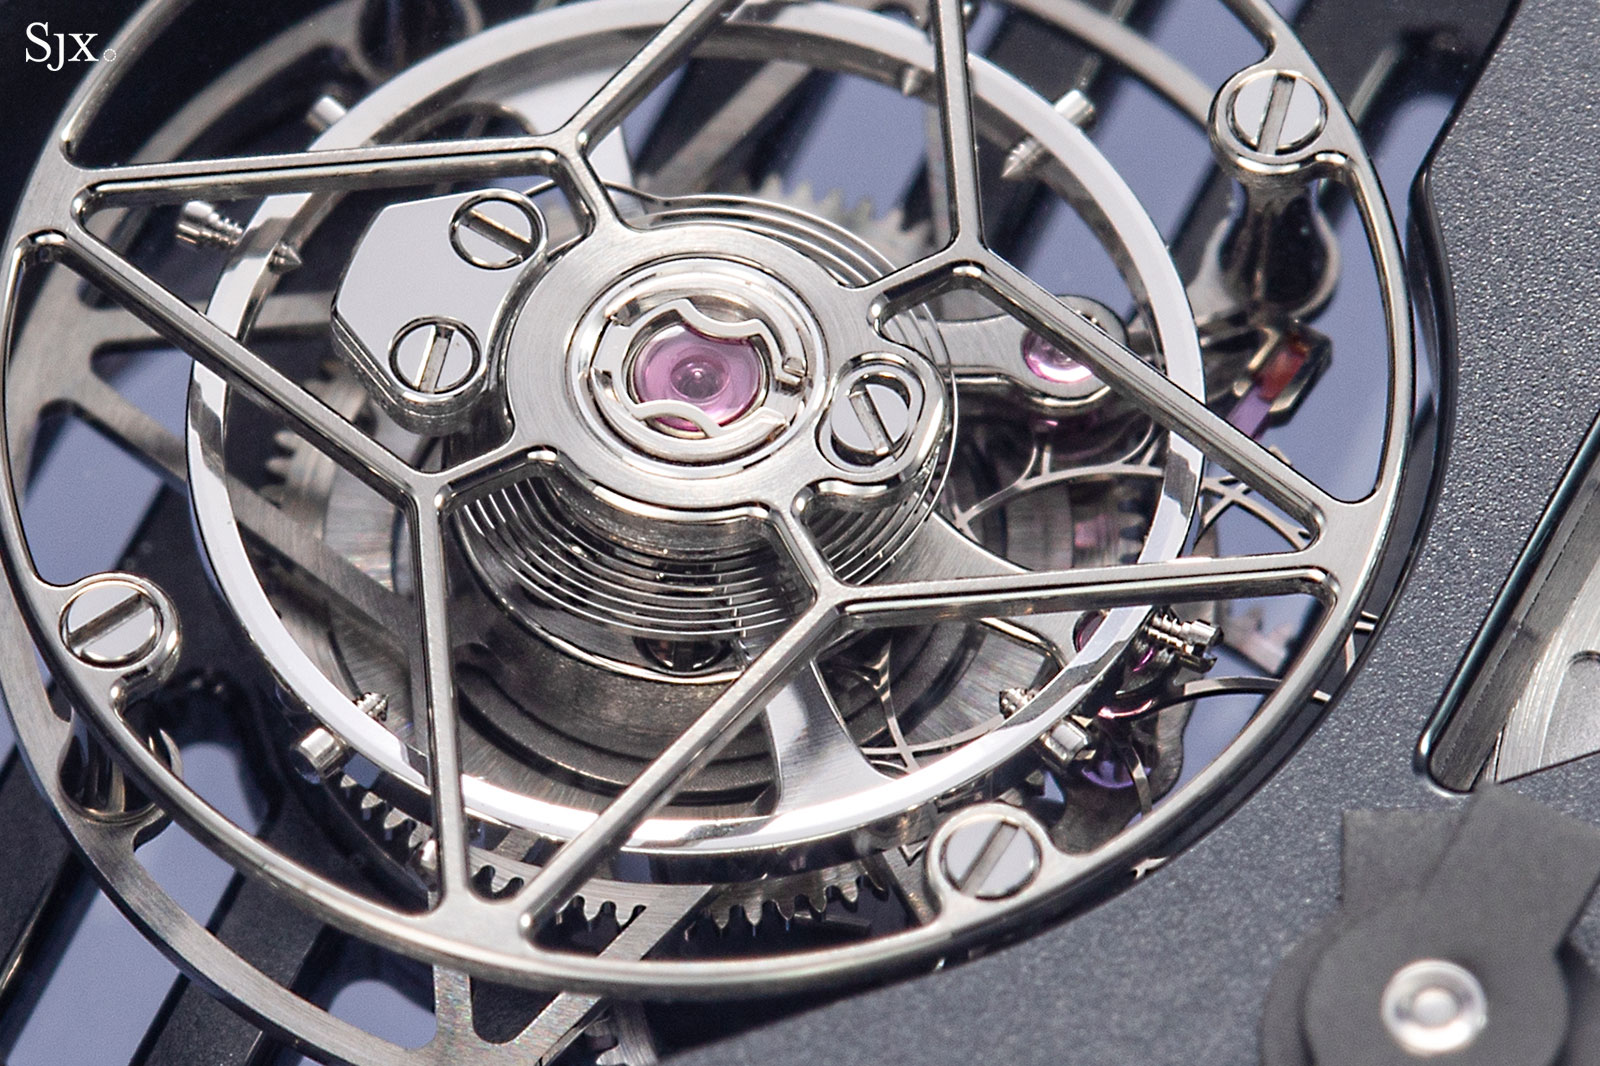 The Louis Vuitton Tambour Curve Flying Tourbillon Is A €280,000 Watch  Novelty For 2020